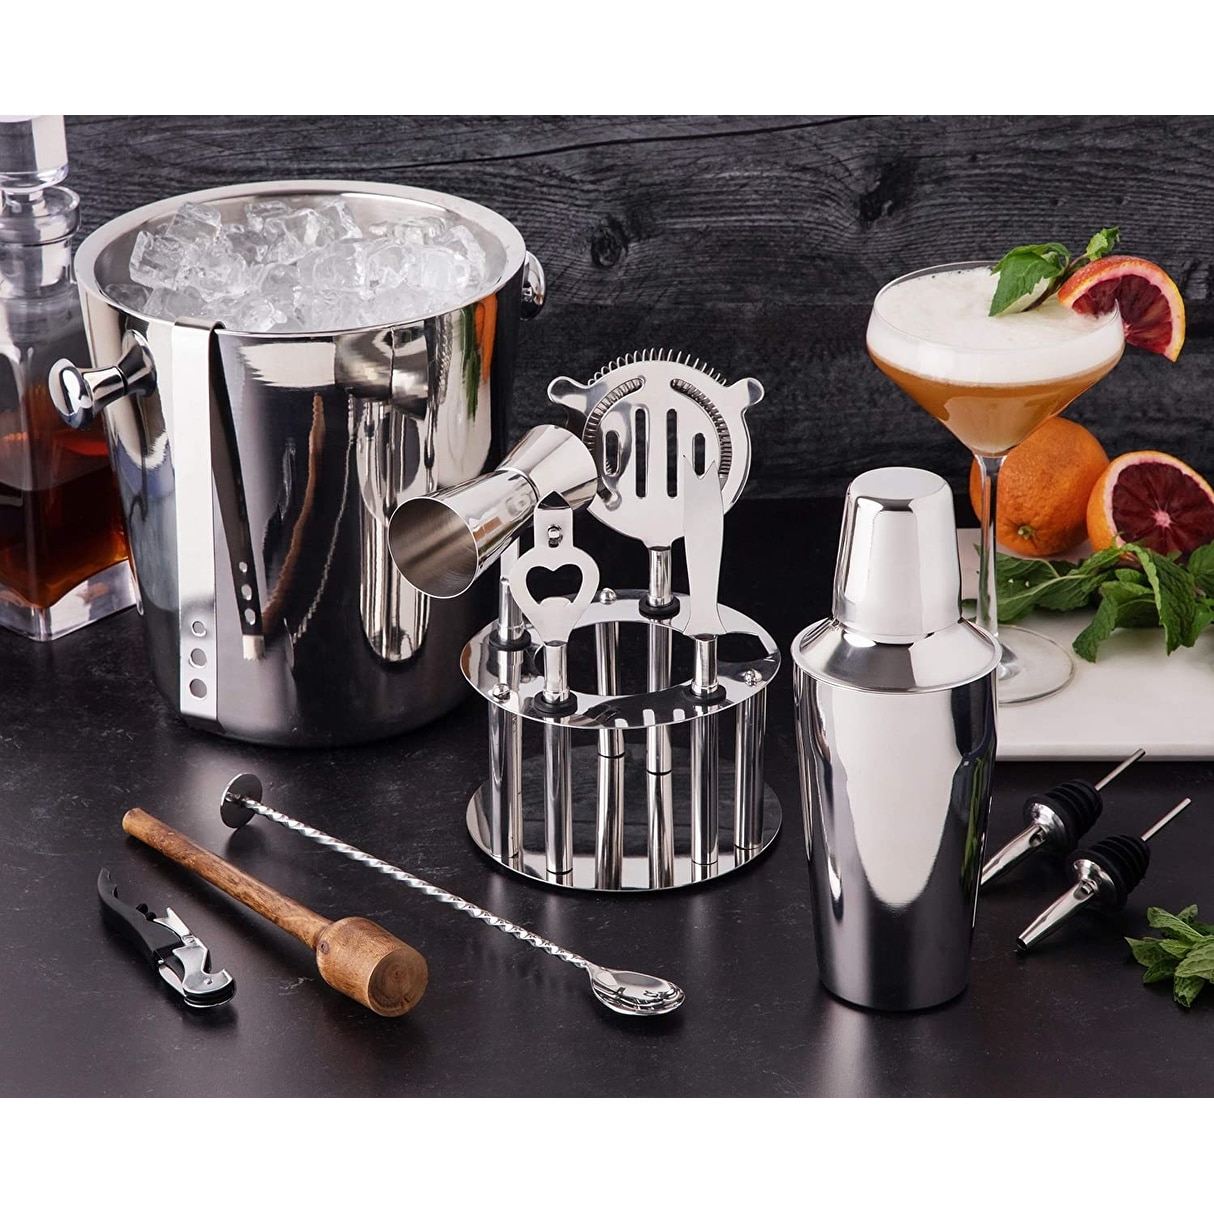 Briout Jigger for Bartending with Measurements Inside - Bed Bath & Beyond -  37280305